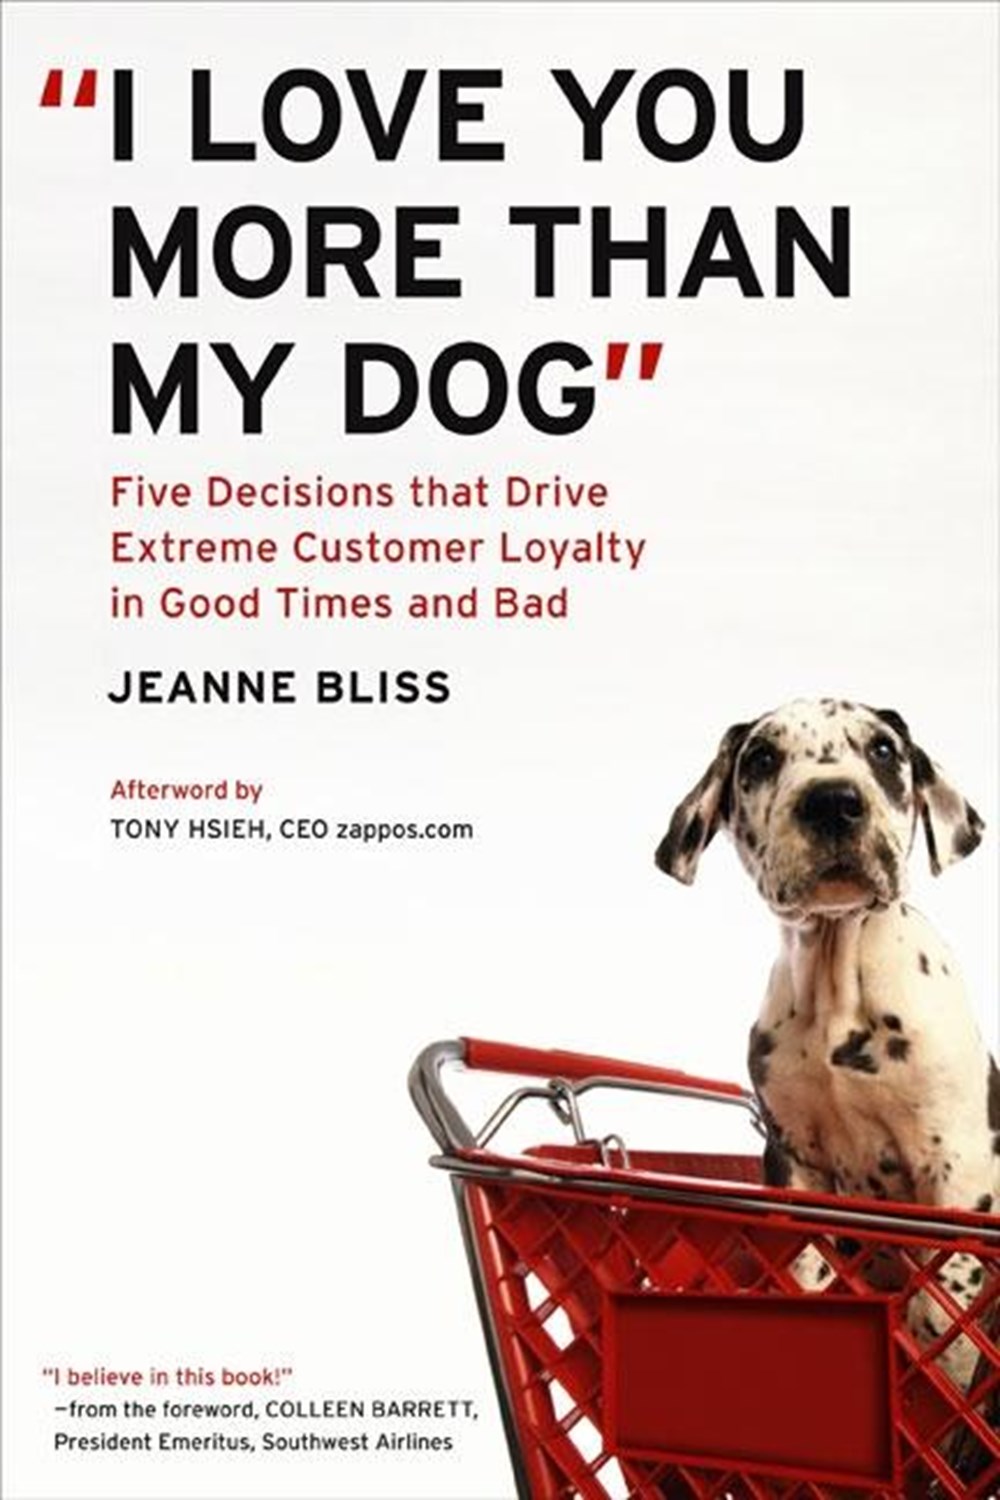 I Love You More Than My Dog Five Decisions That Drive Extreme Customer Loyalty in Good Times and Bad